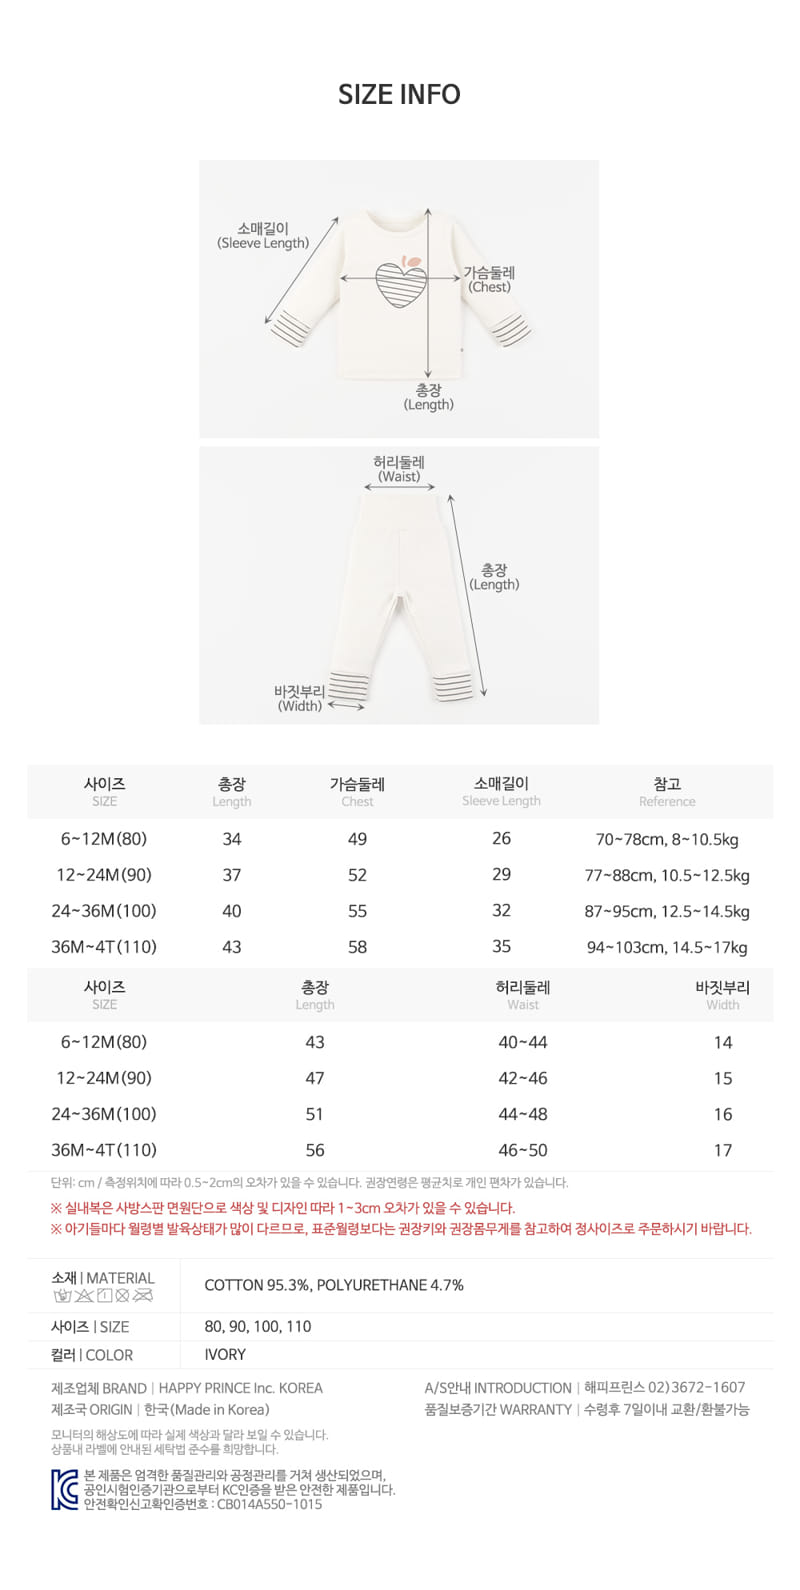 Kids Clara - Korean Baby Fashion - #babyfever - Molang Compy Belly Baby Easy Wear - 9